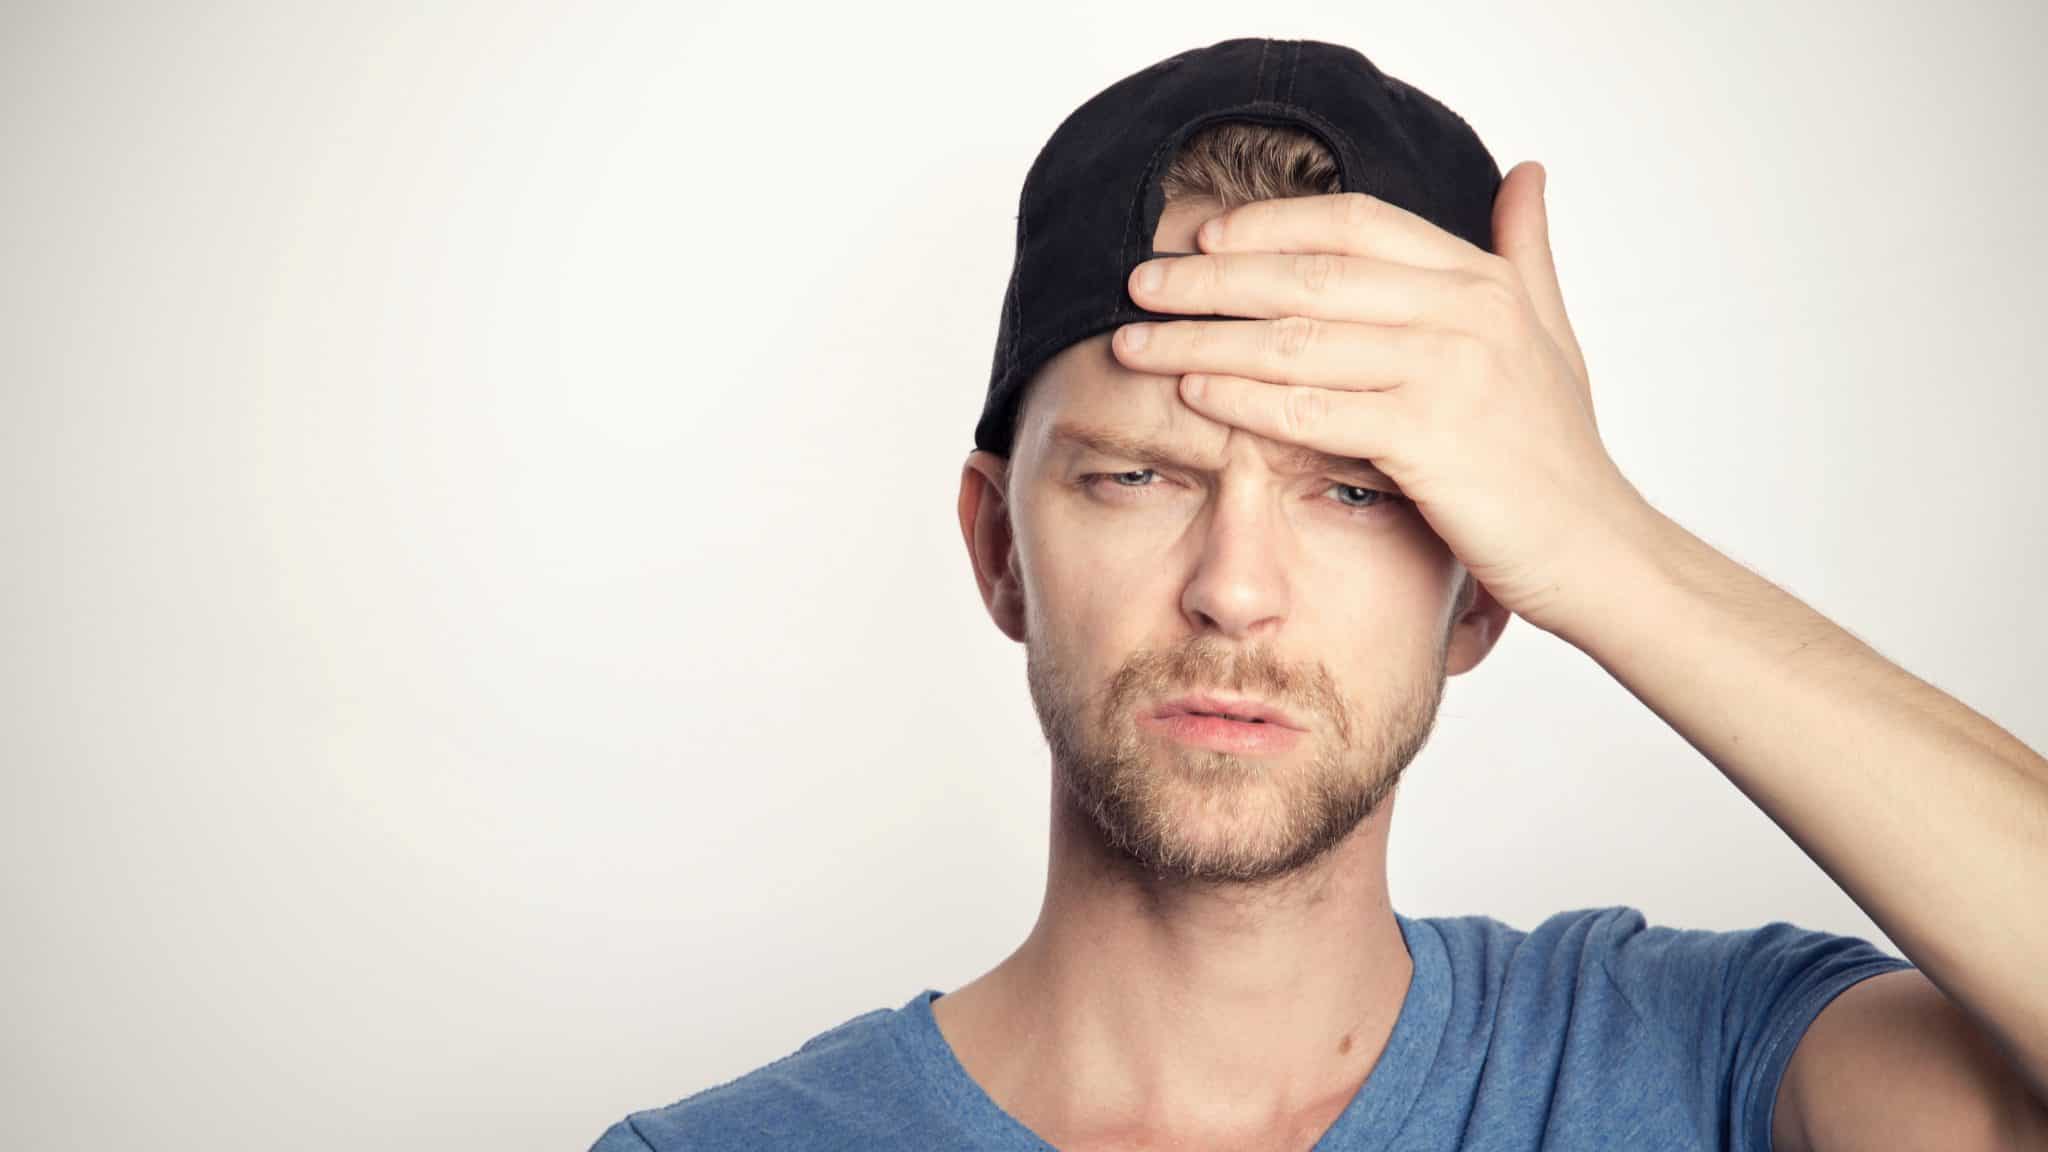 man wearing a backwards baseball cap looking confused with his hand to his head